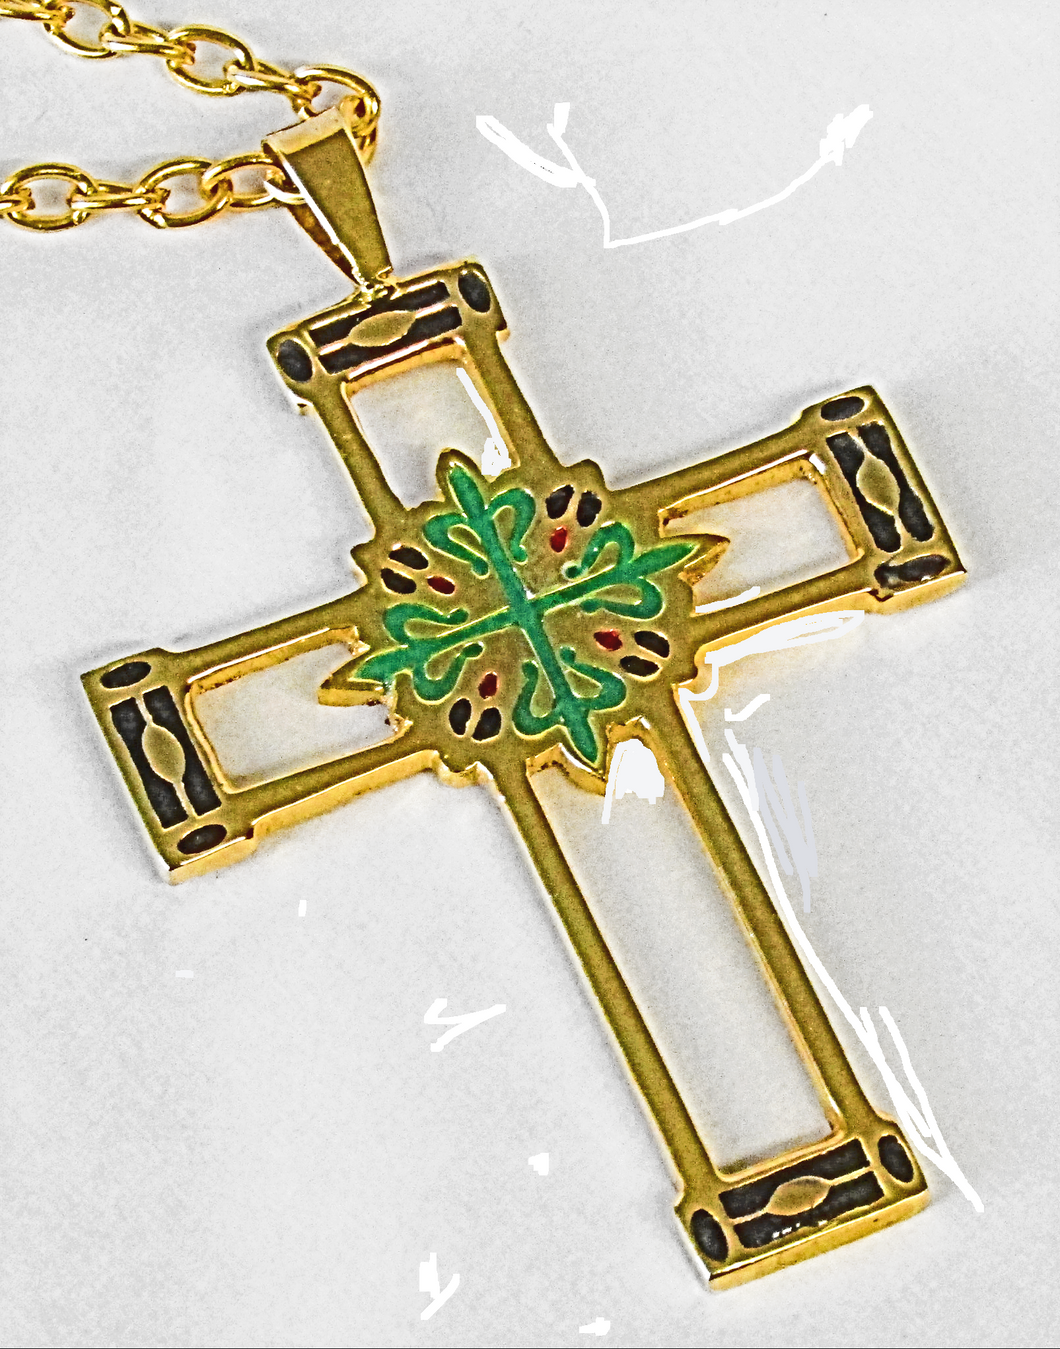 mds Pect #6 -Gold Plated inlay cross